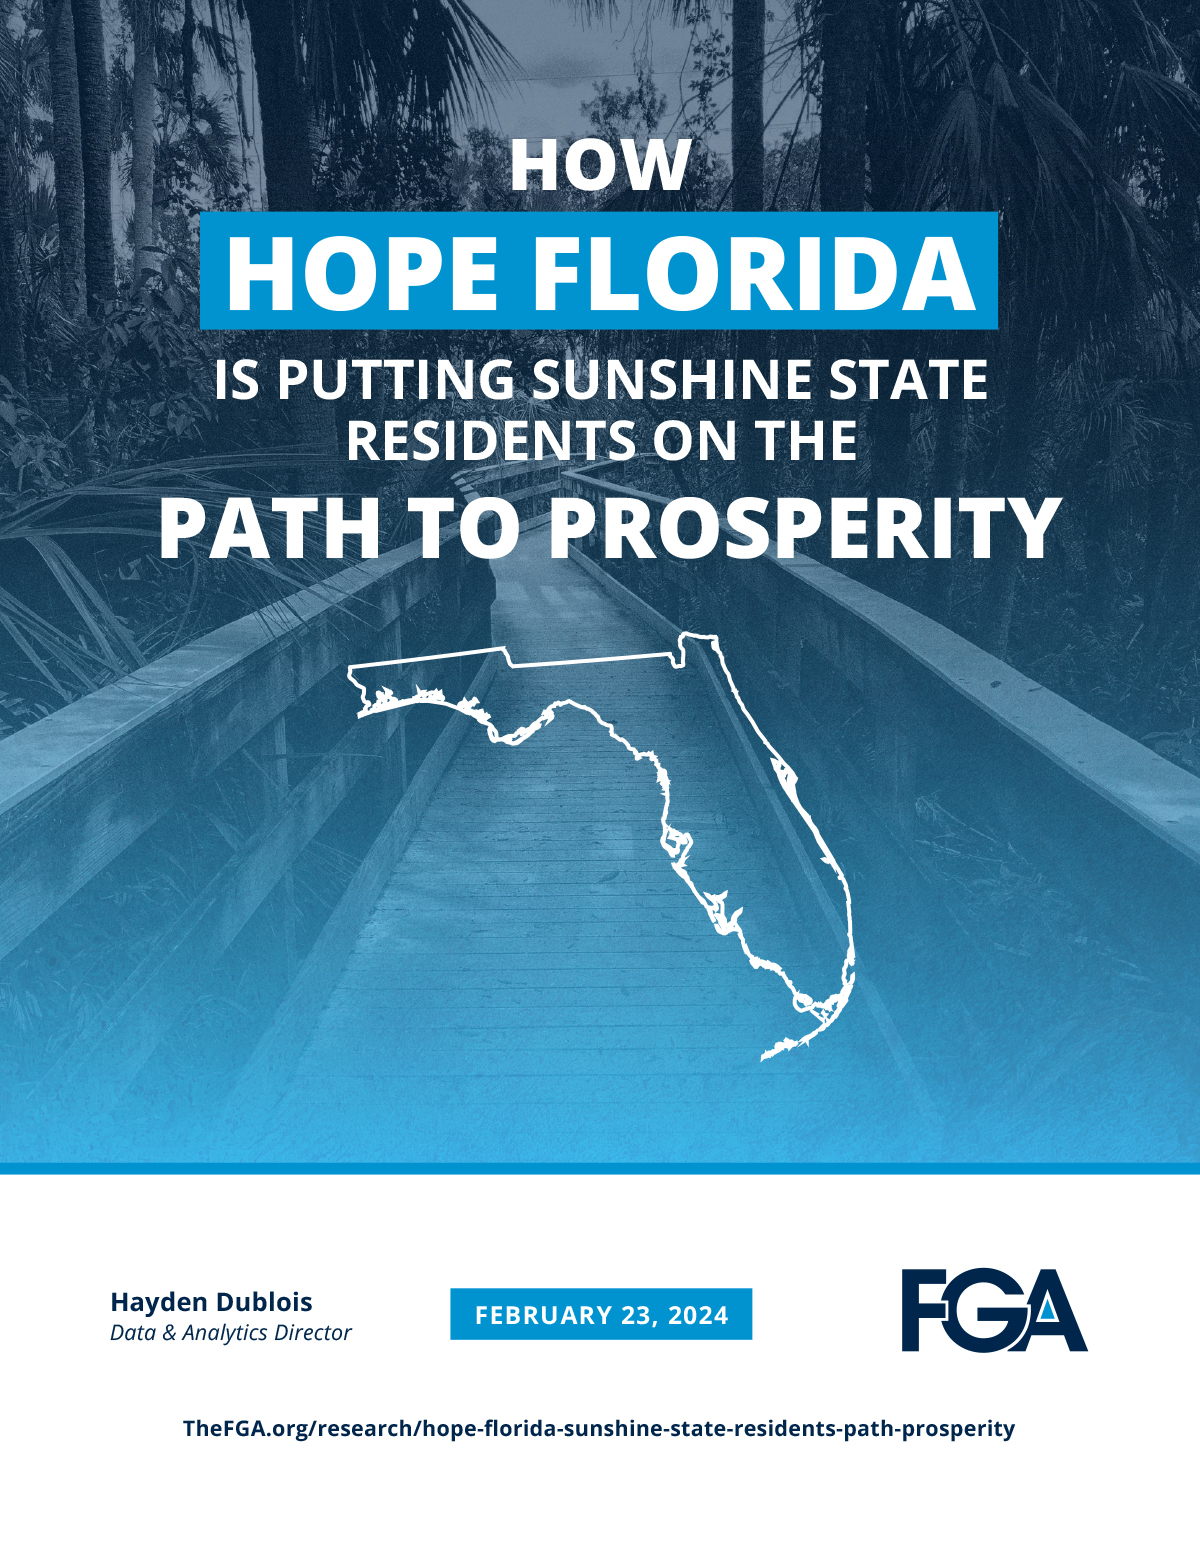 How Hope Florida Is Putting Sunshine State Residents on a Path to Prosperity